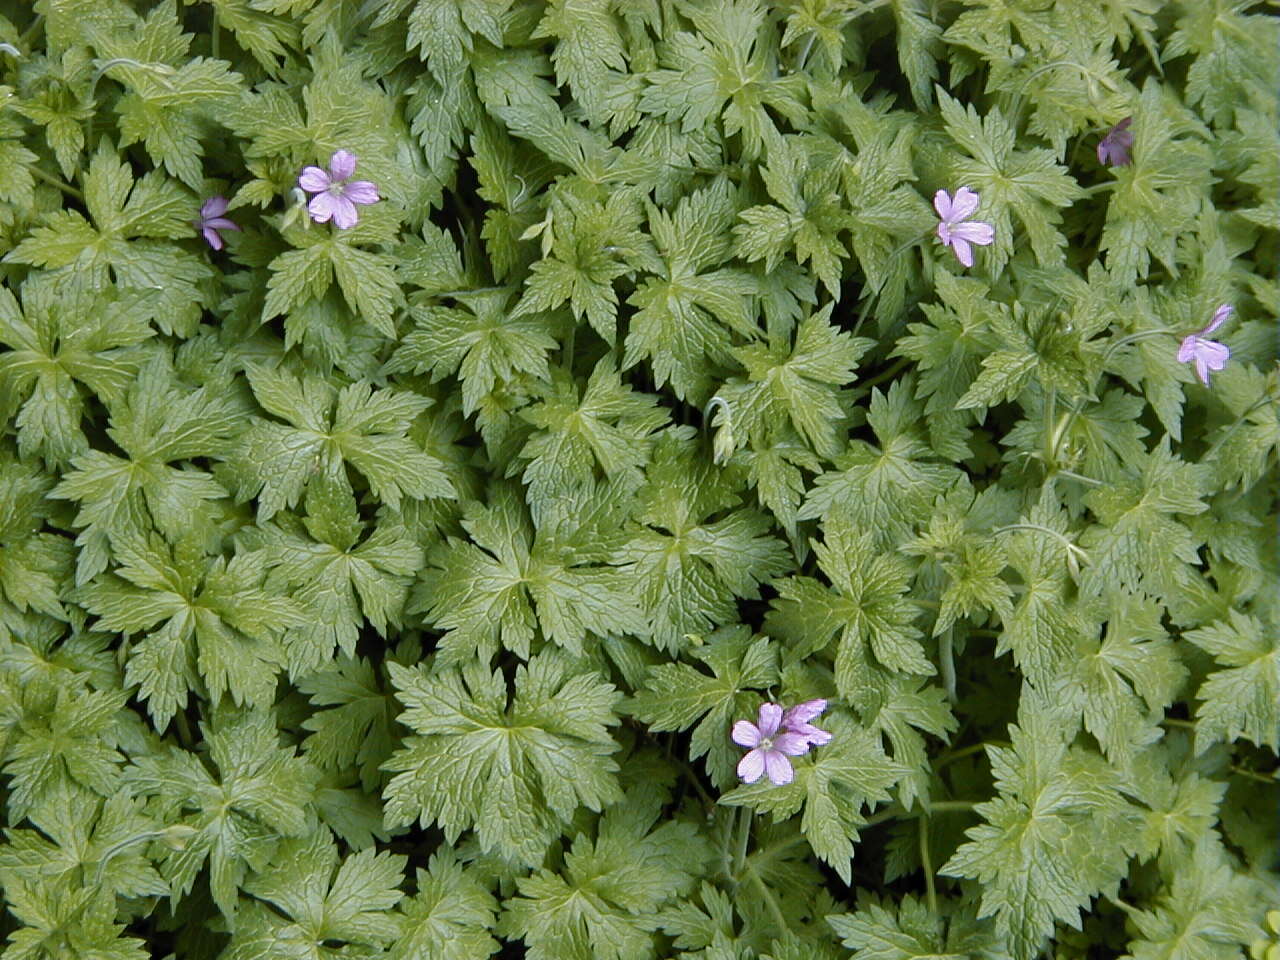 Image of Endres's cranesbill